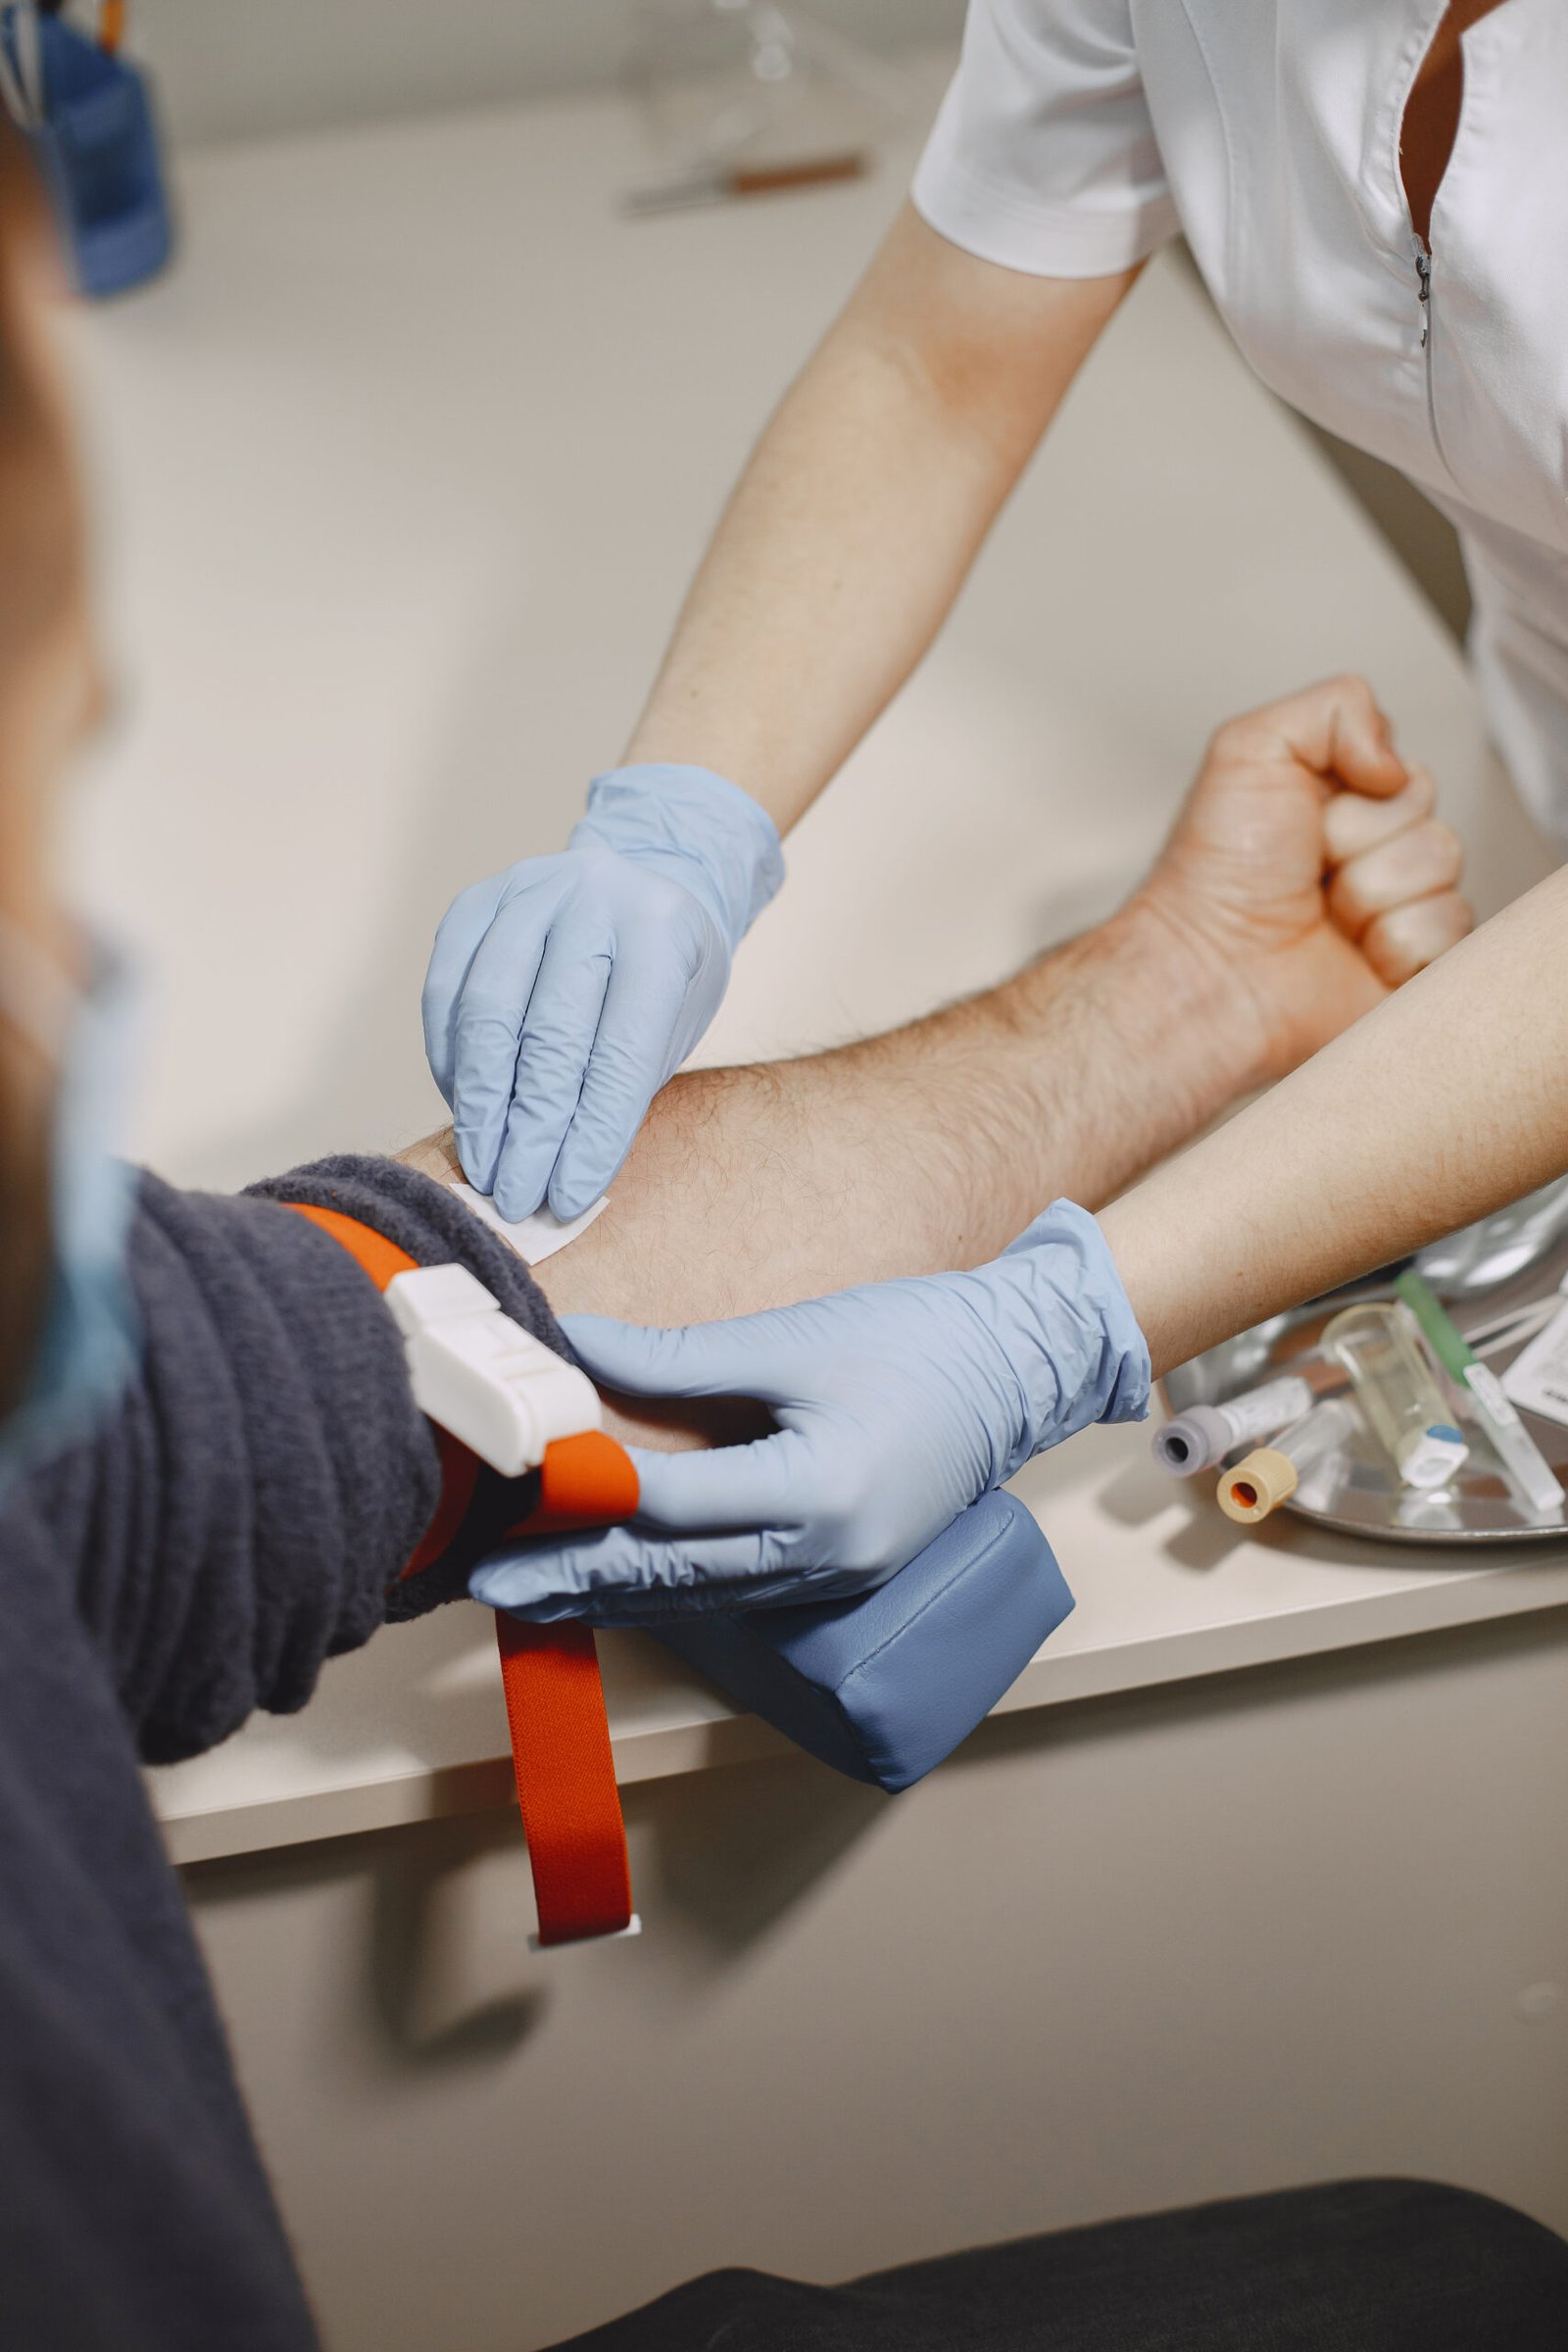 Blood Donor’s Diet May Trigger Allergic Reactions In Recipients: Study